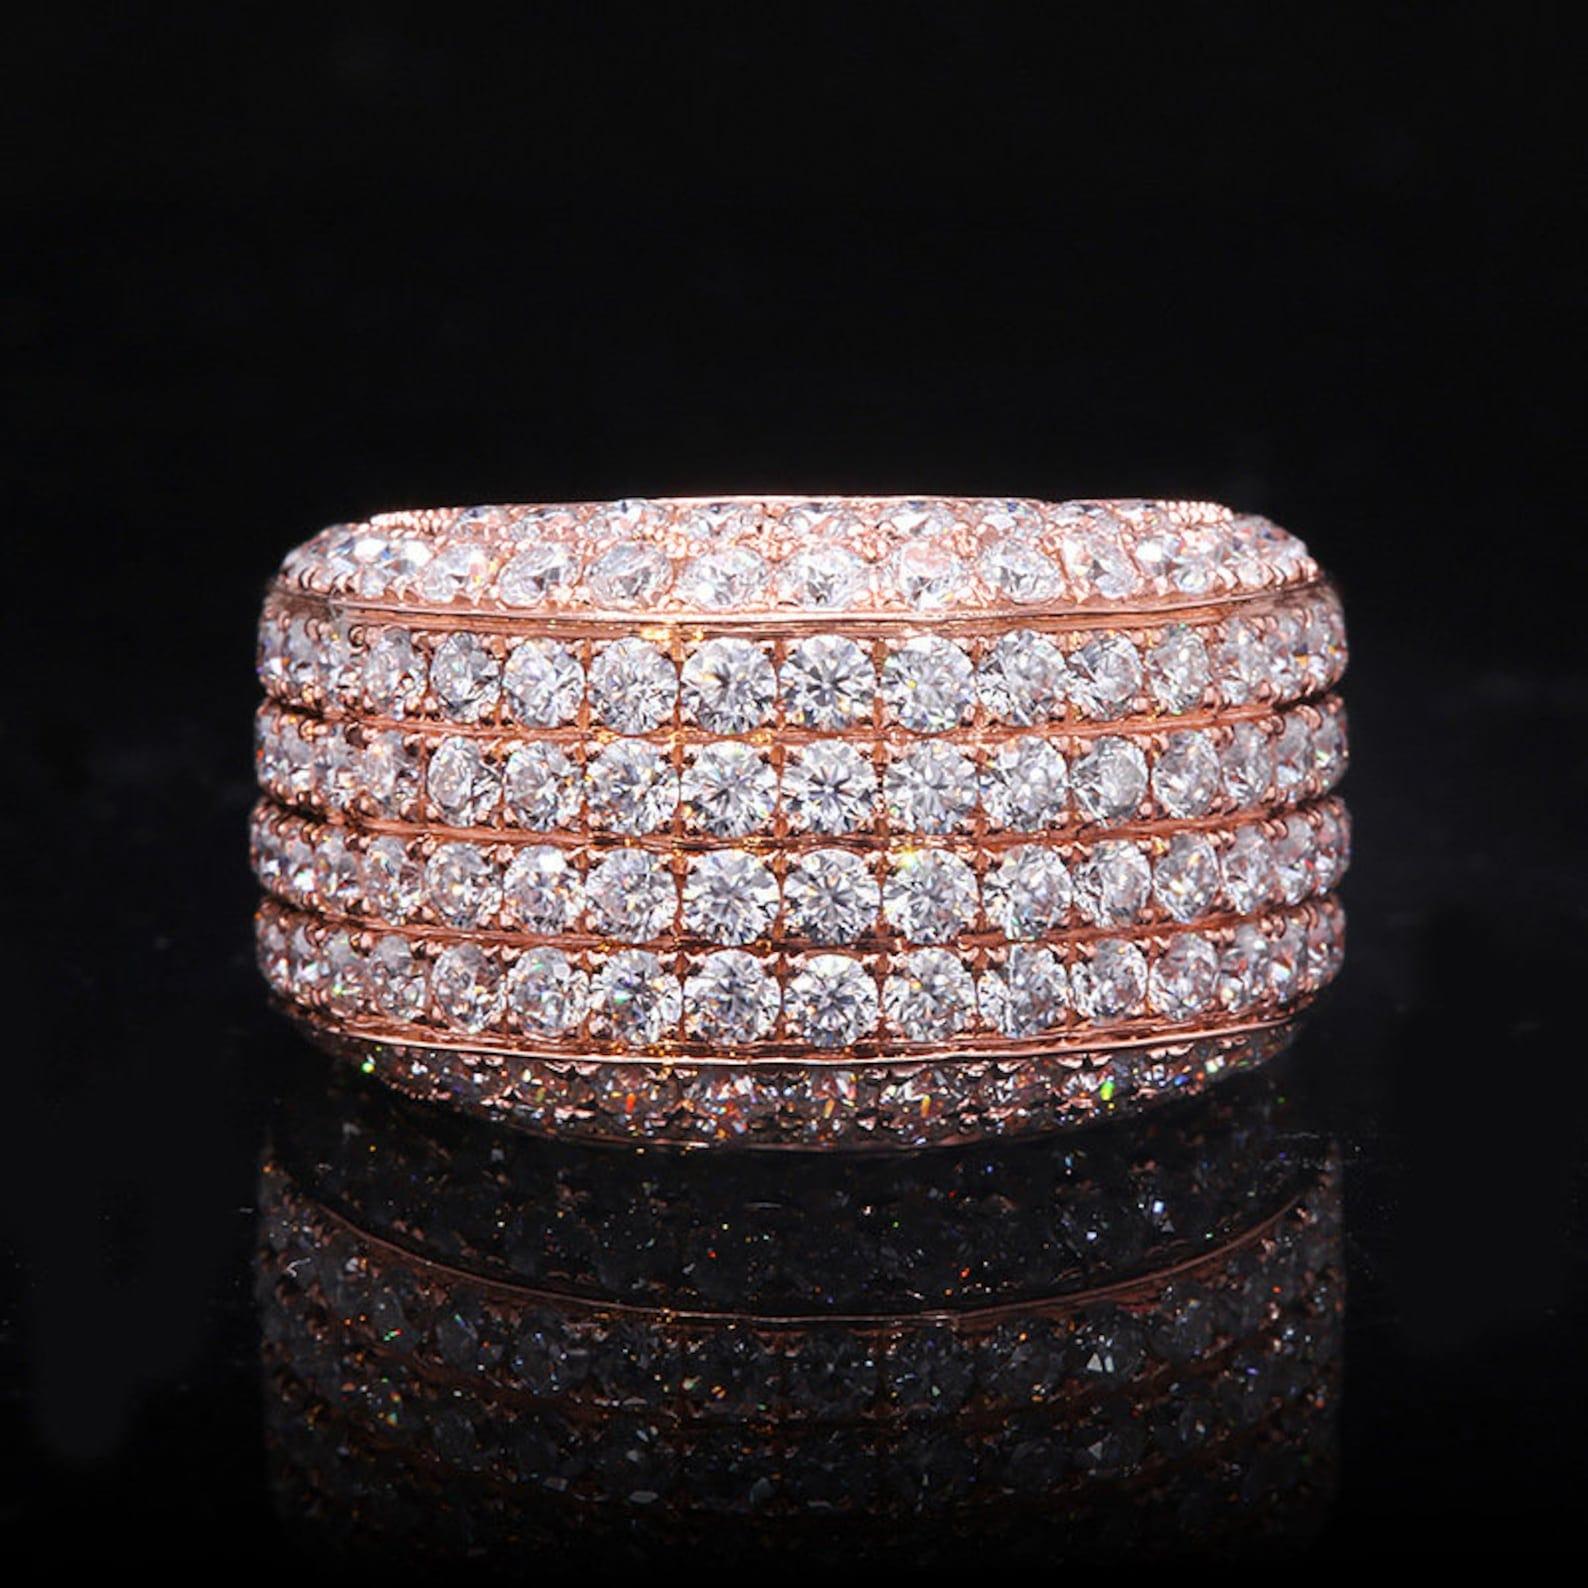 4ctw Solid Silver Pave Sparkling Iced Out 8Row Round Cut Moissanite Diamond Band - JBR Jeweler